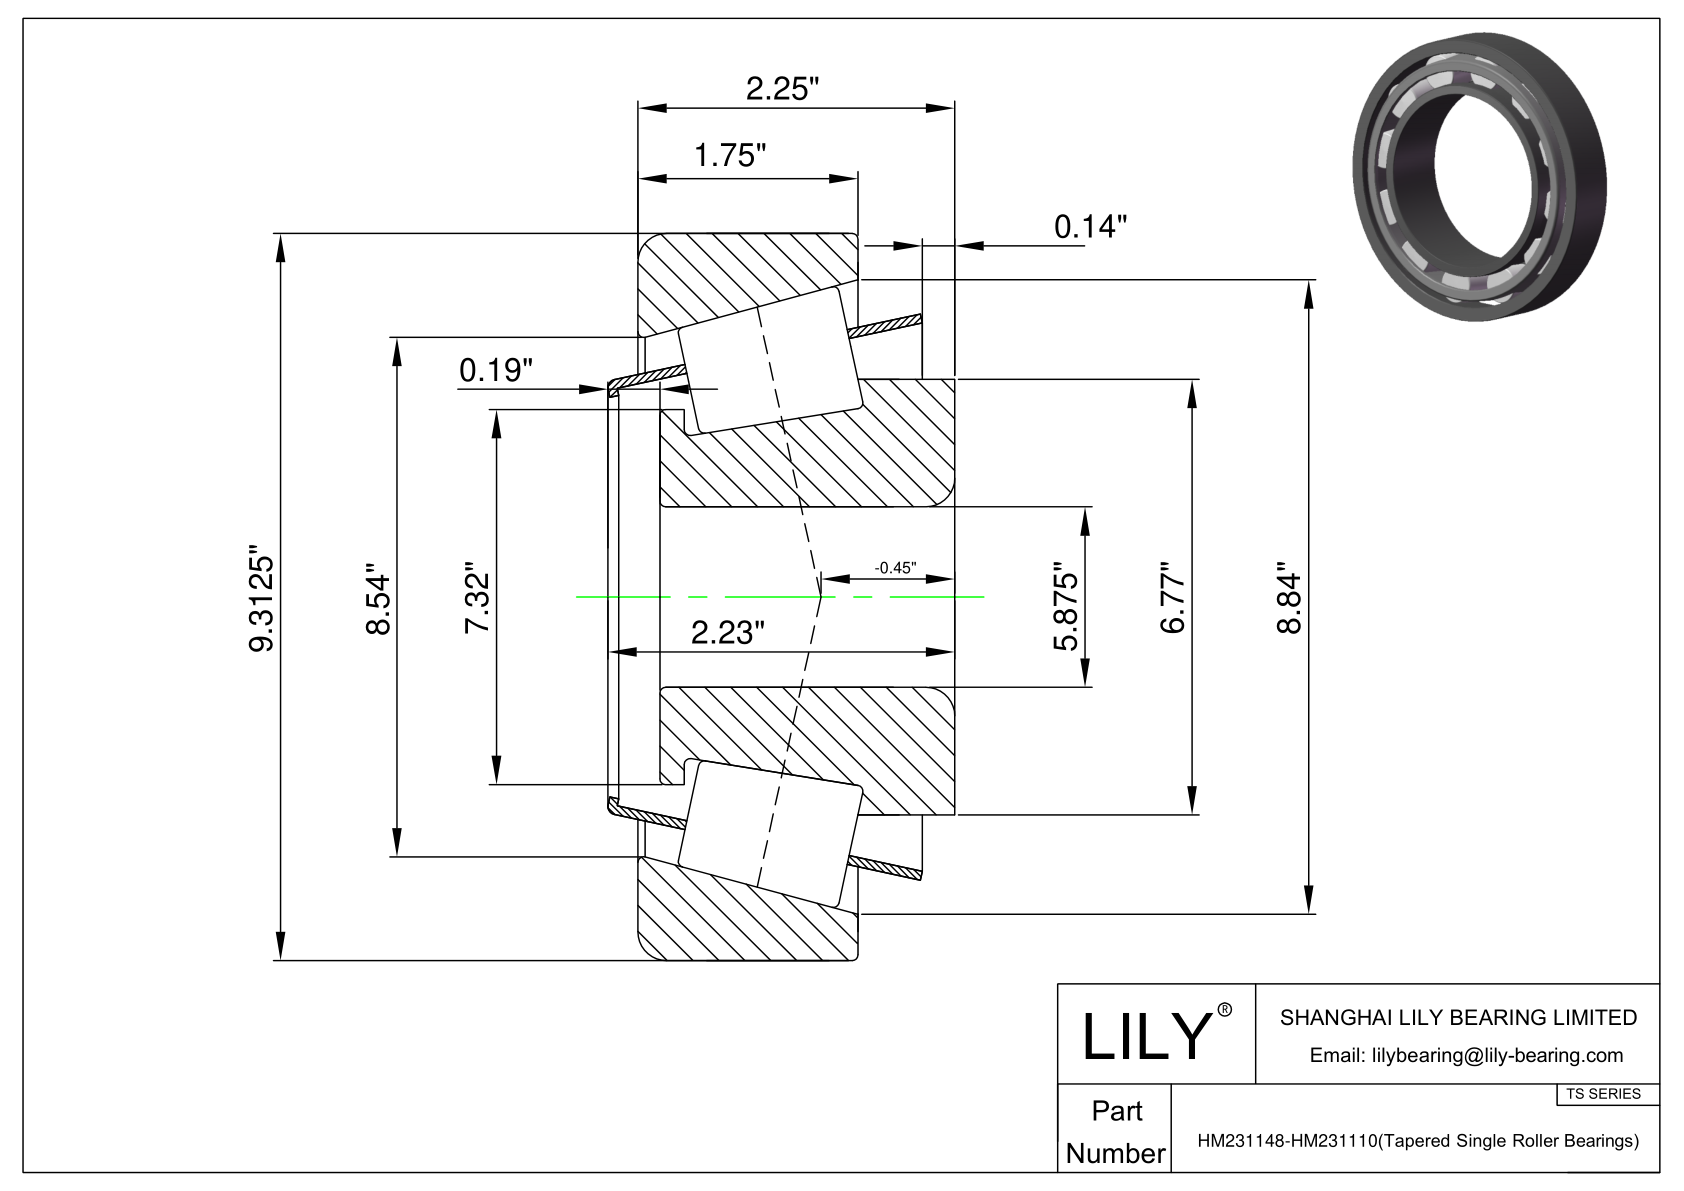 HM231148-HM231110 TS (Tapered Single Roller Bearings) (Imperial) cad drawing